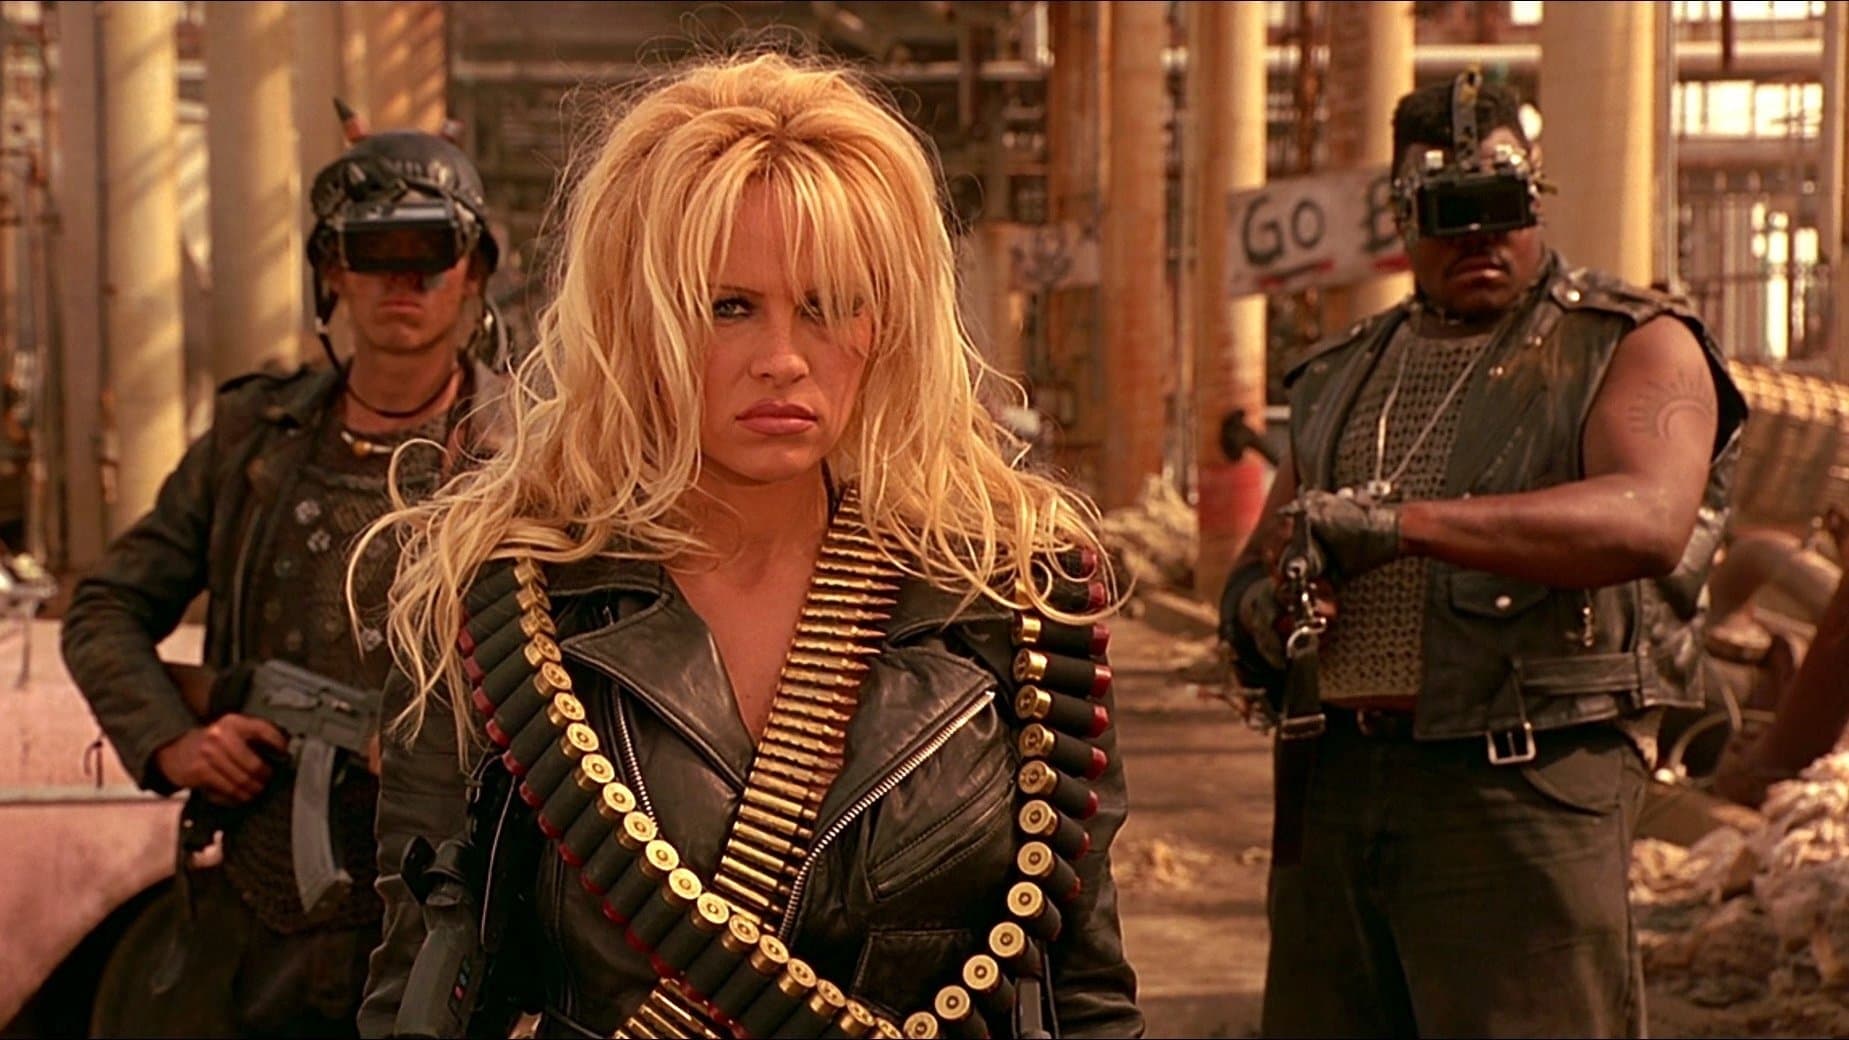 Barb Wire (1996)